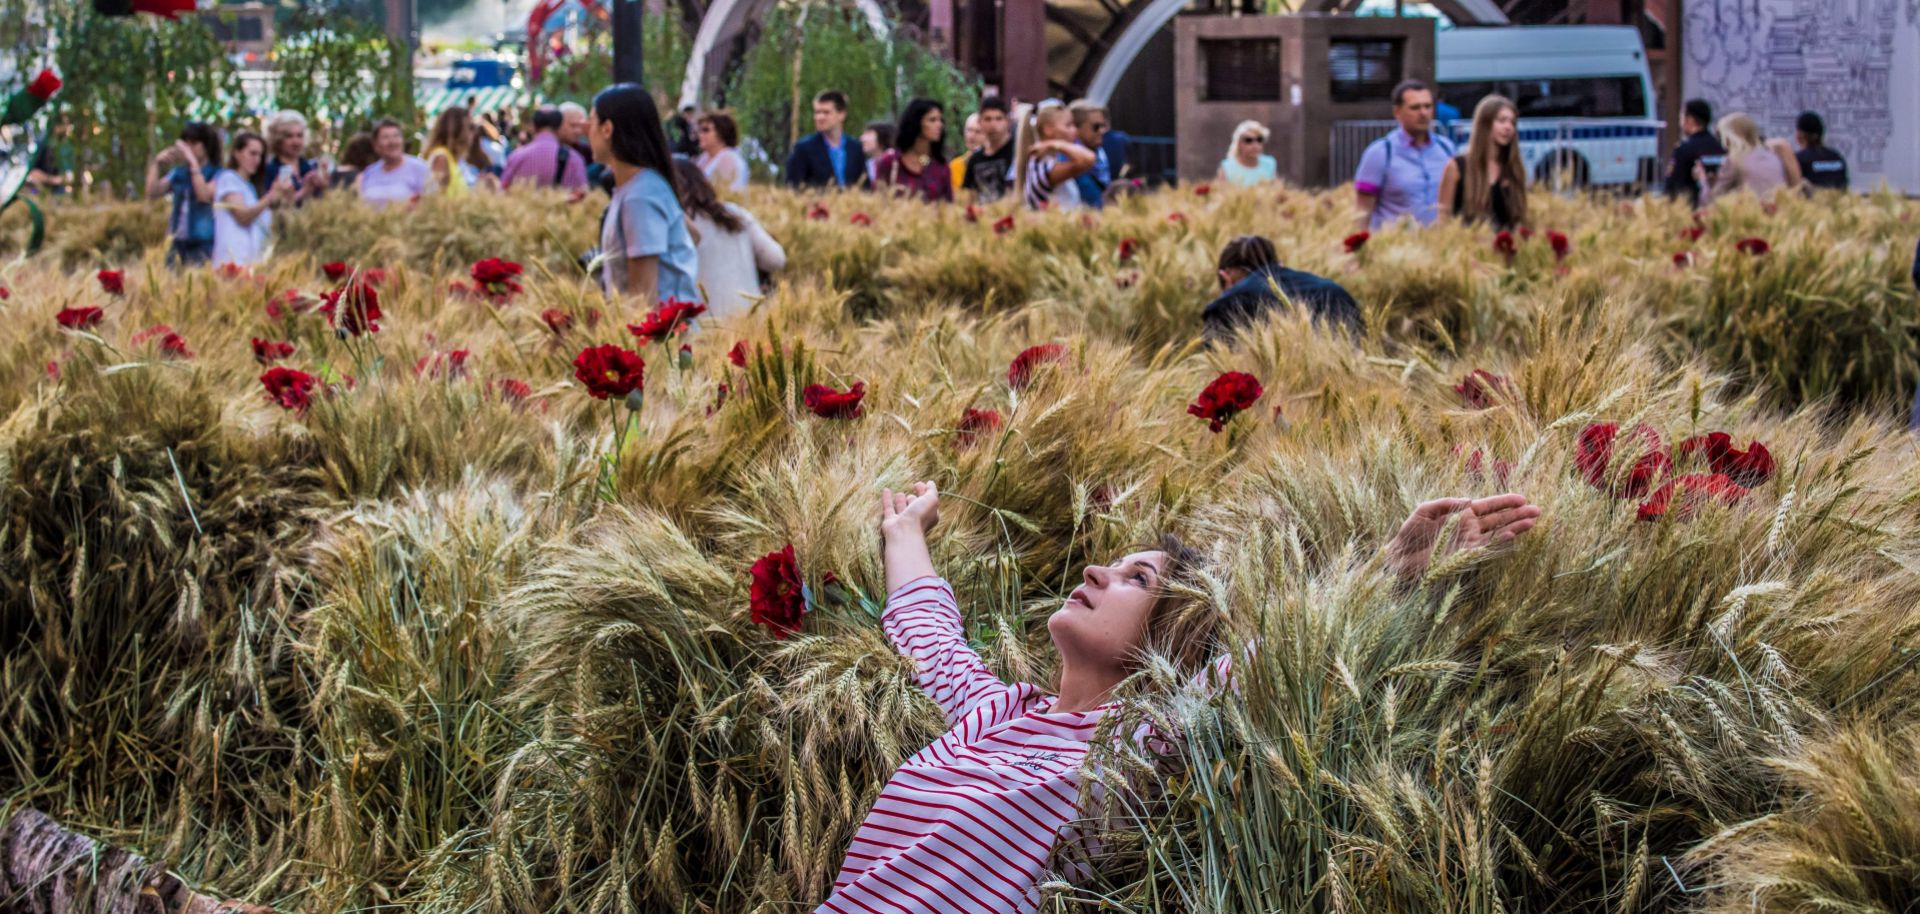 Visitors in downtown Moscow on July 20 explore a wheat field with poppies that was installed during a festival held in Revolution Square next to the State Historical Museum.